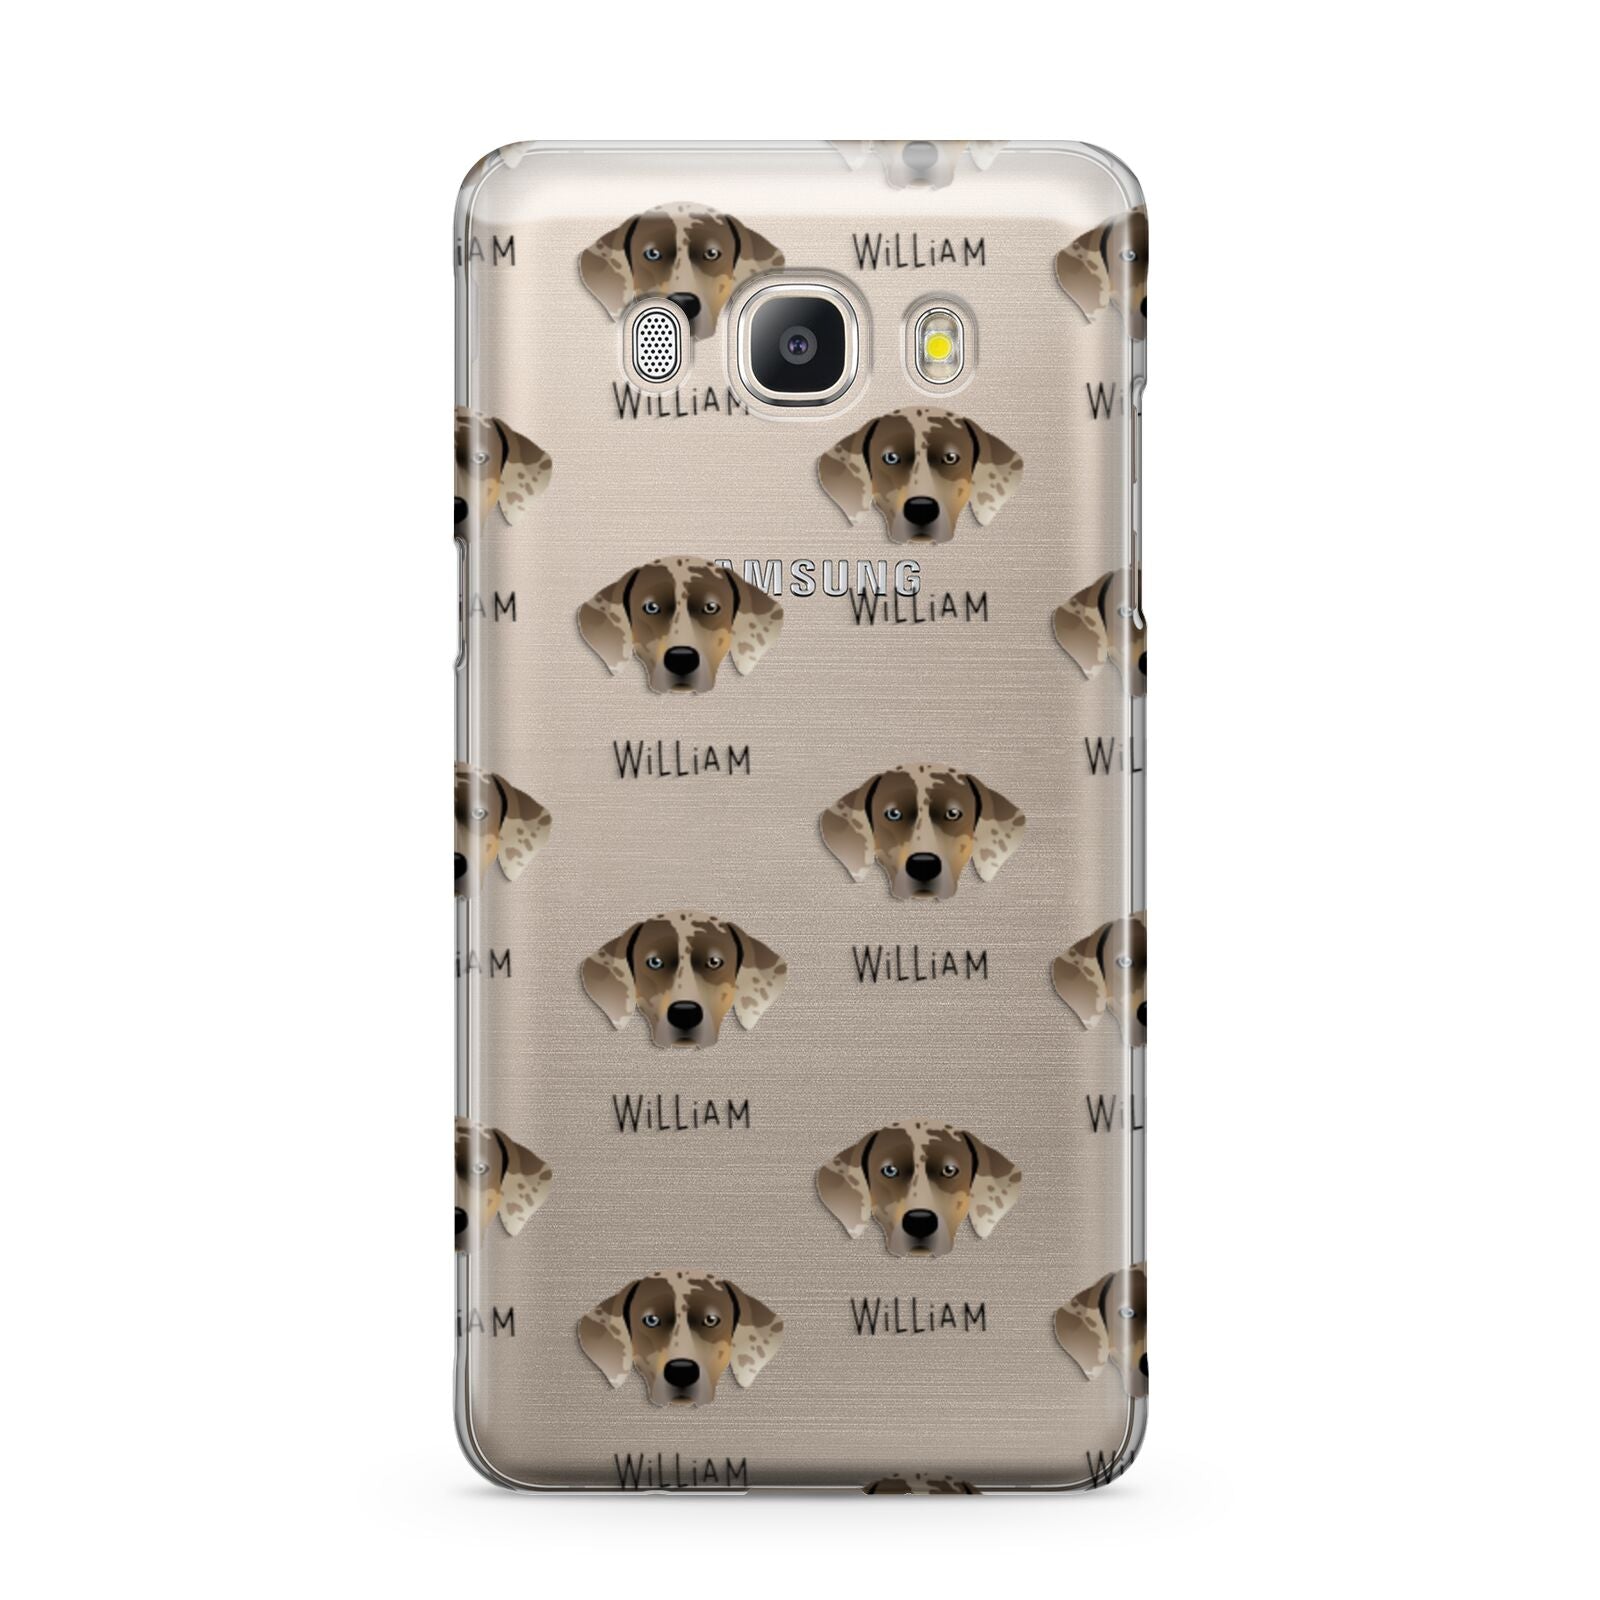 Catahoula Leopard Dog Icon with Name Samsung Galaxy J5 2016 Case